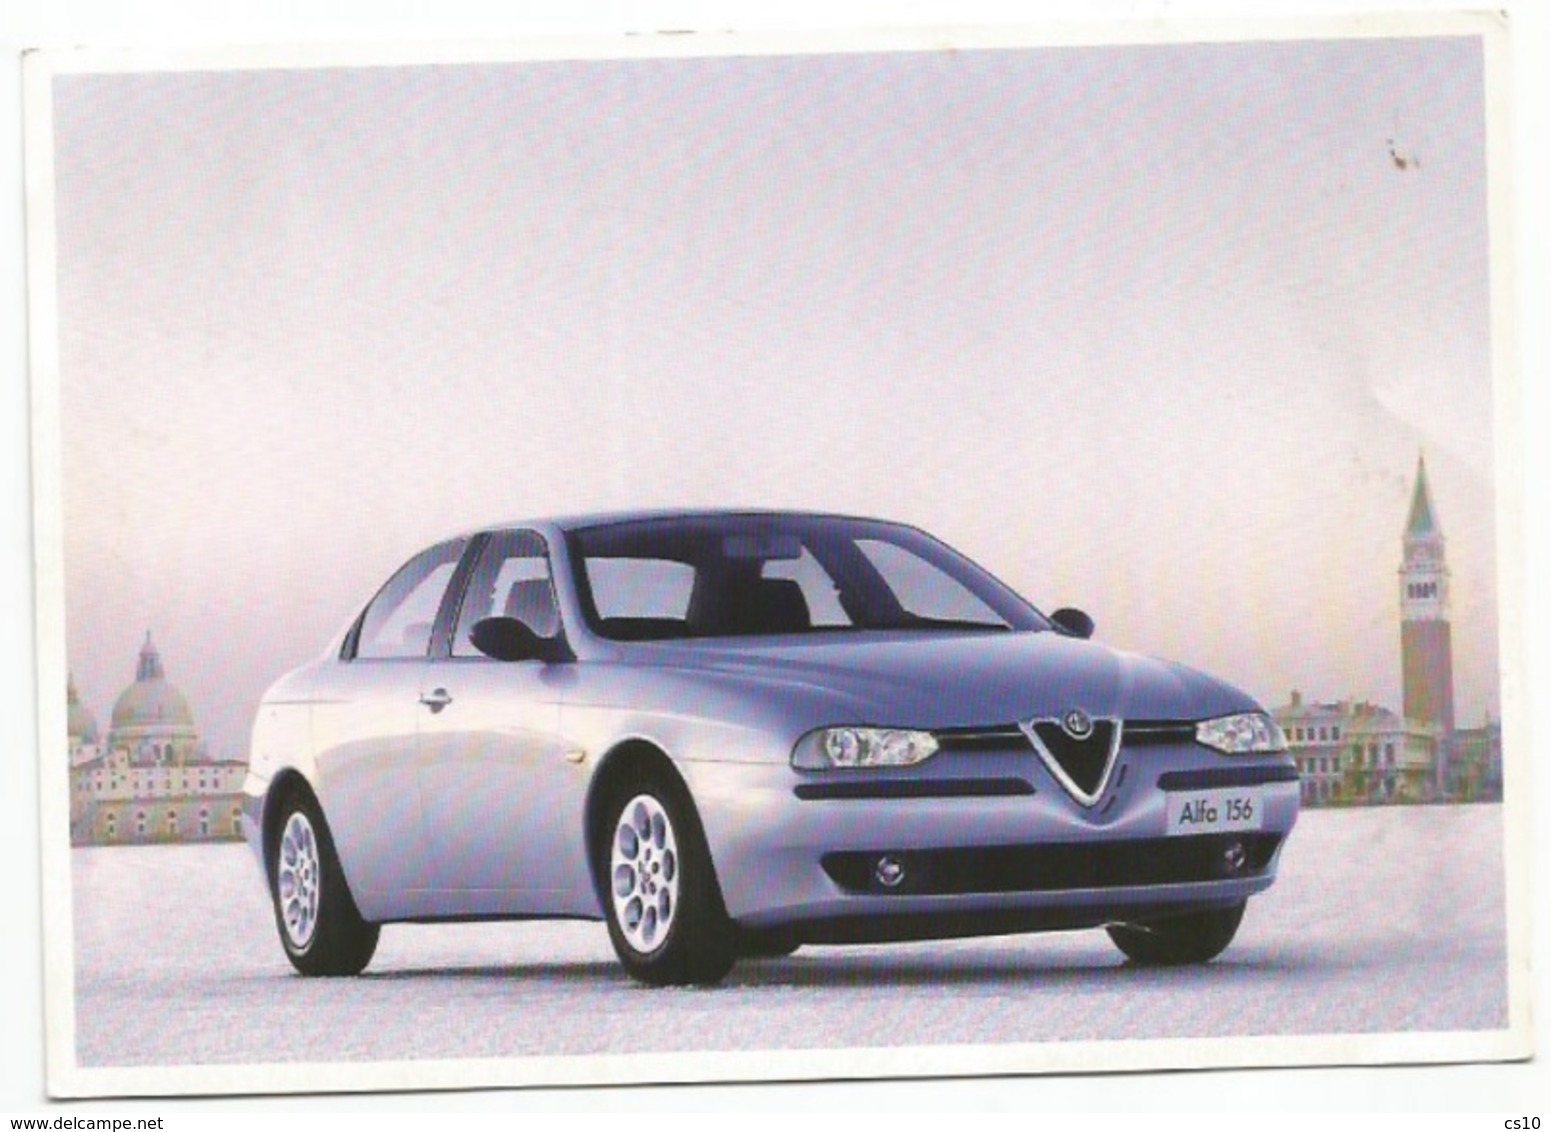 Car Mobile Automobile Alfa Romeo "156" Official By FIAT Advertising Promo Pcard Torino 14oct1997 To Milano - Passenger Cars